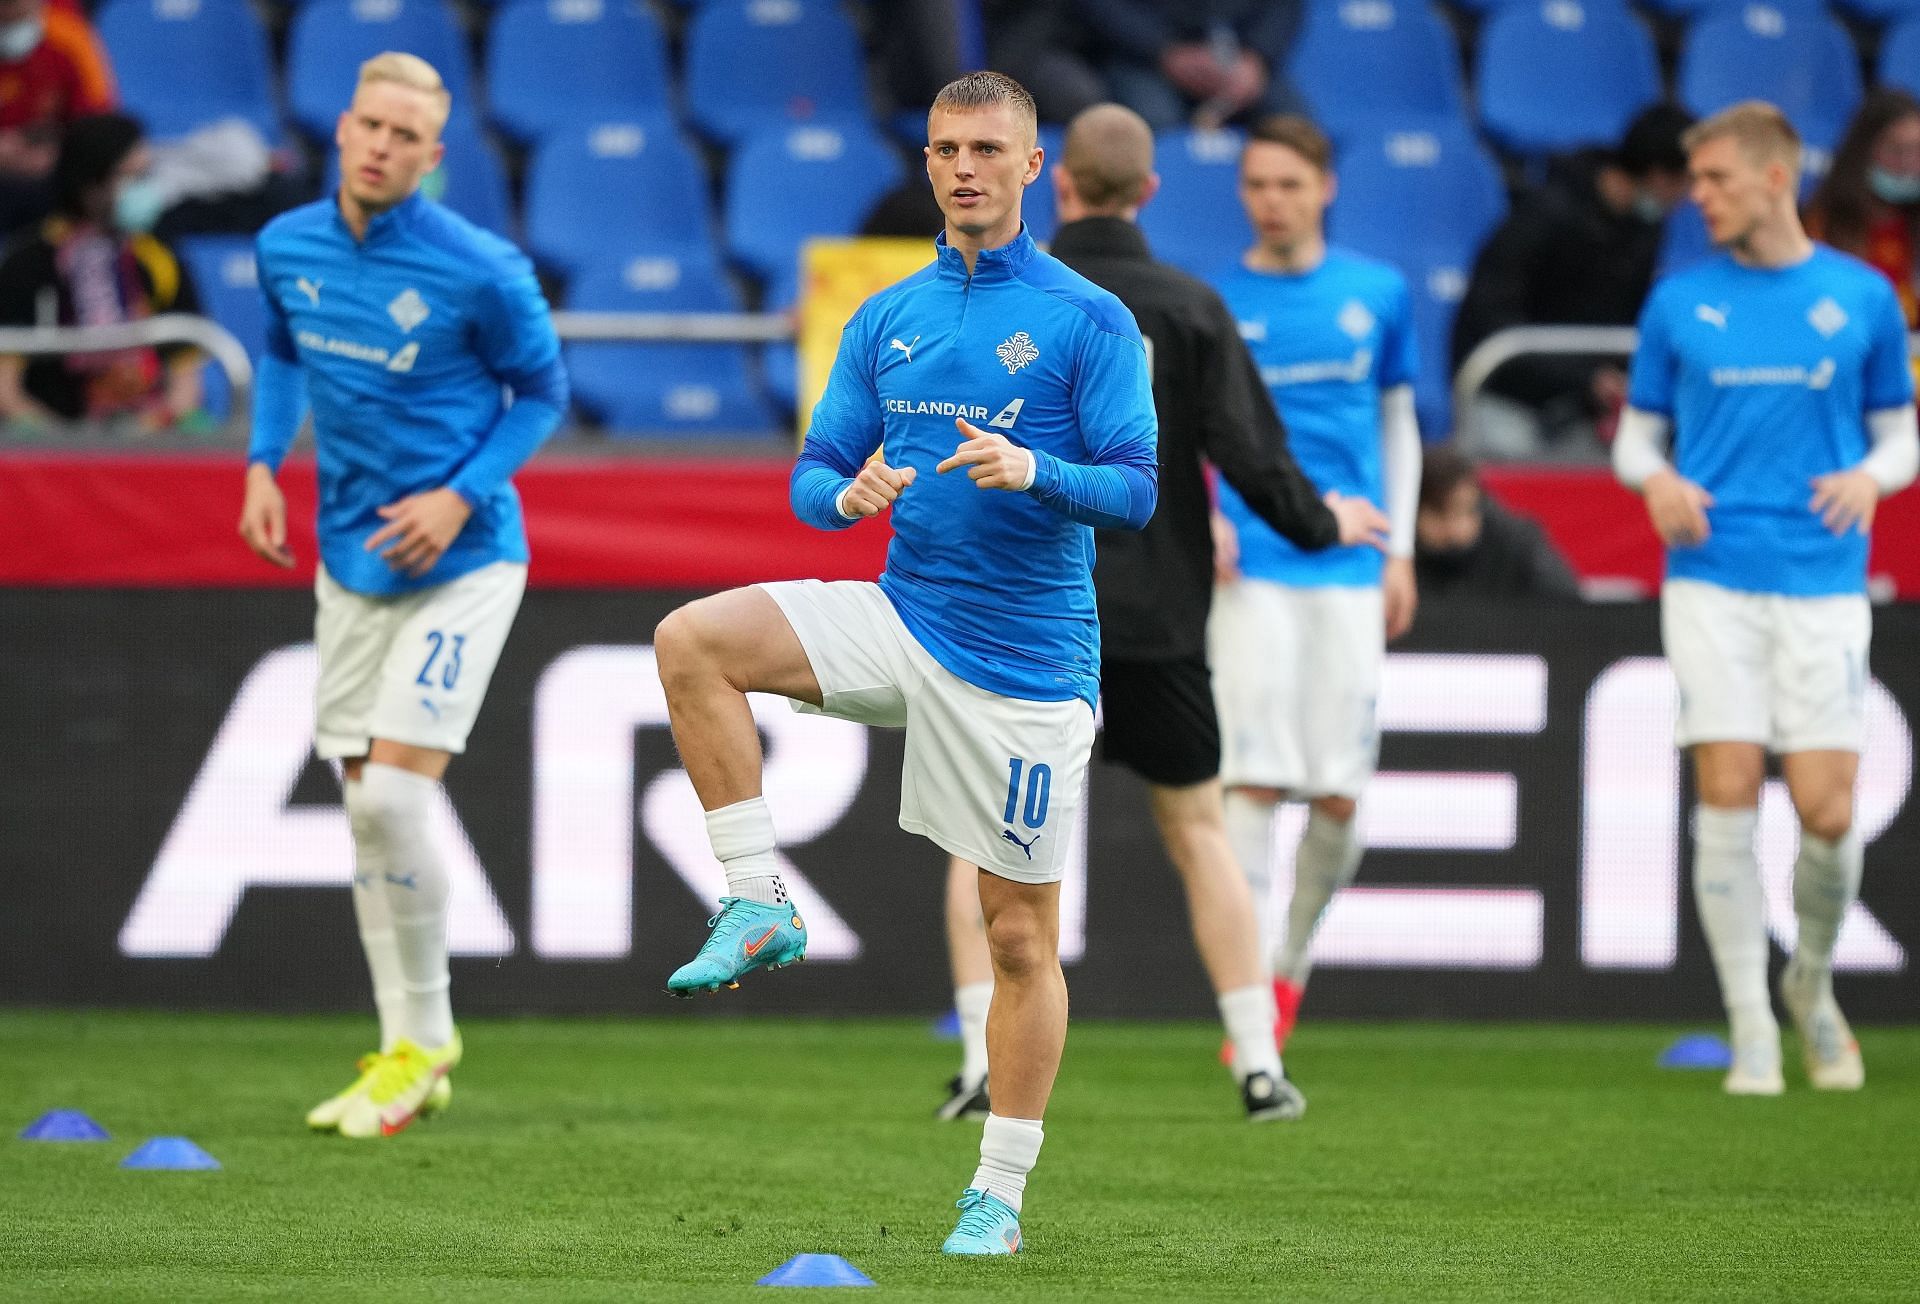 Iceland host Albania in their UEFA Nations League fixture on Monday